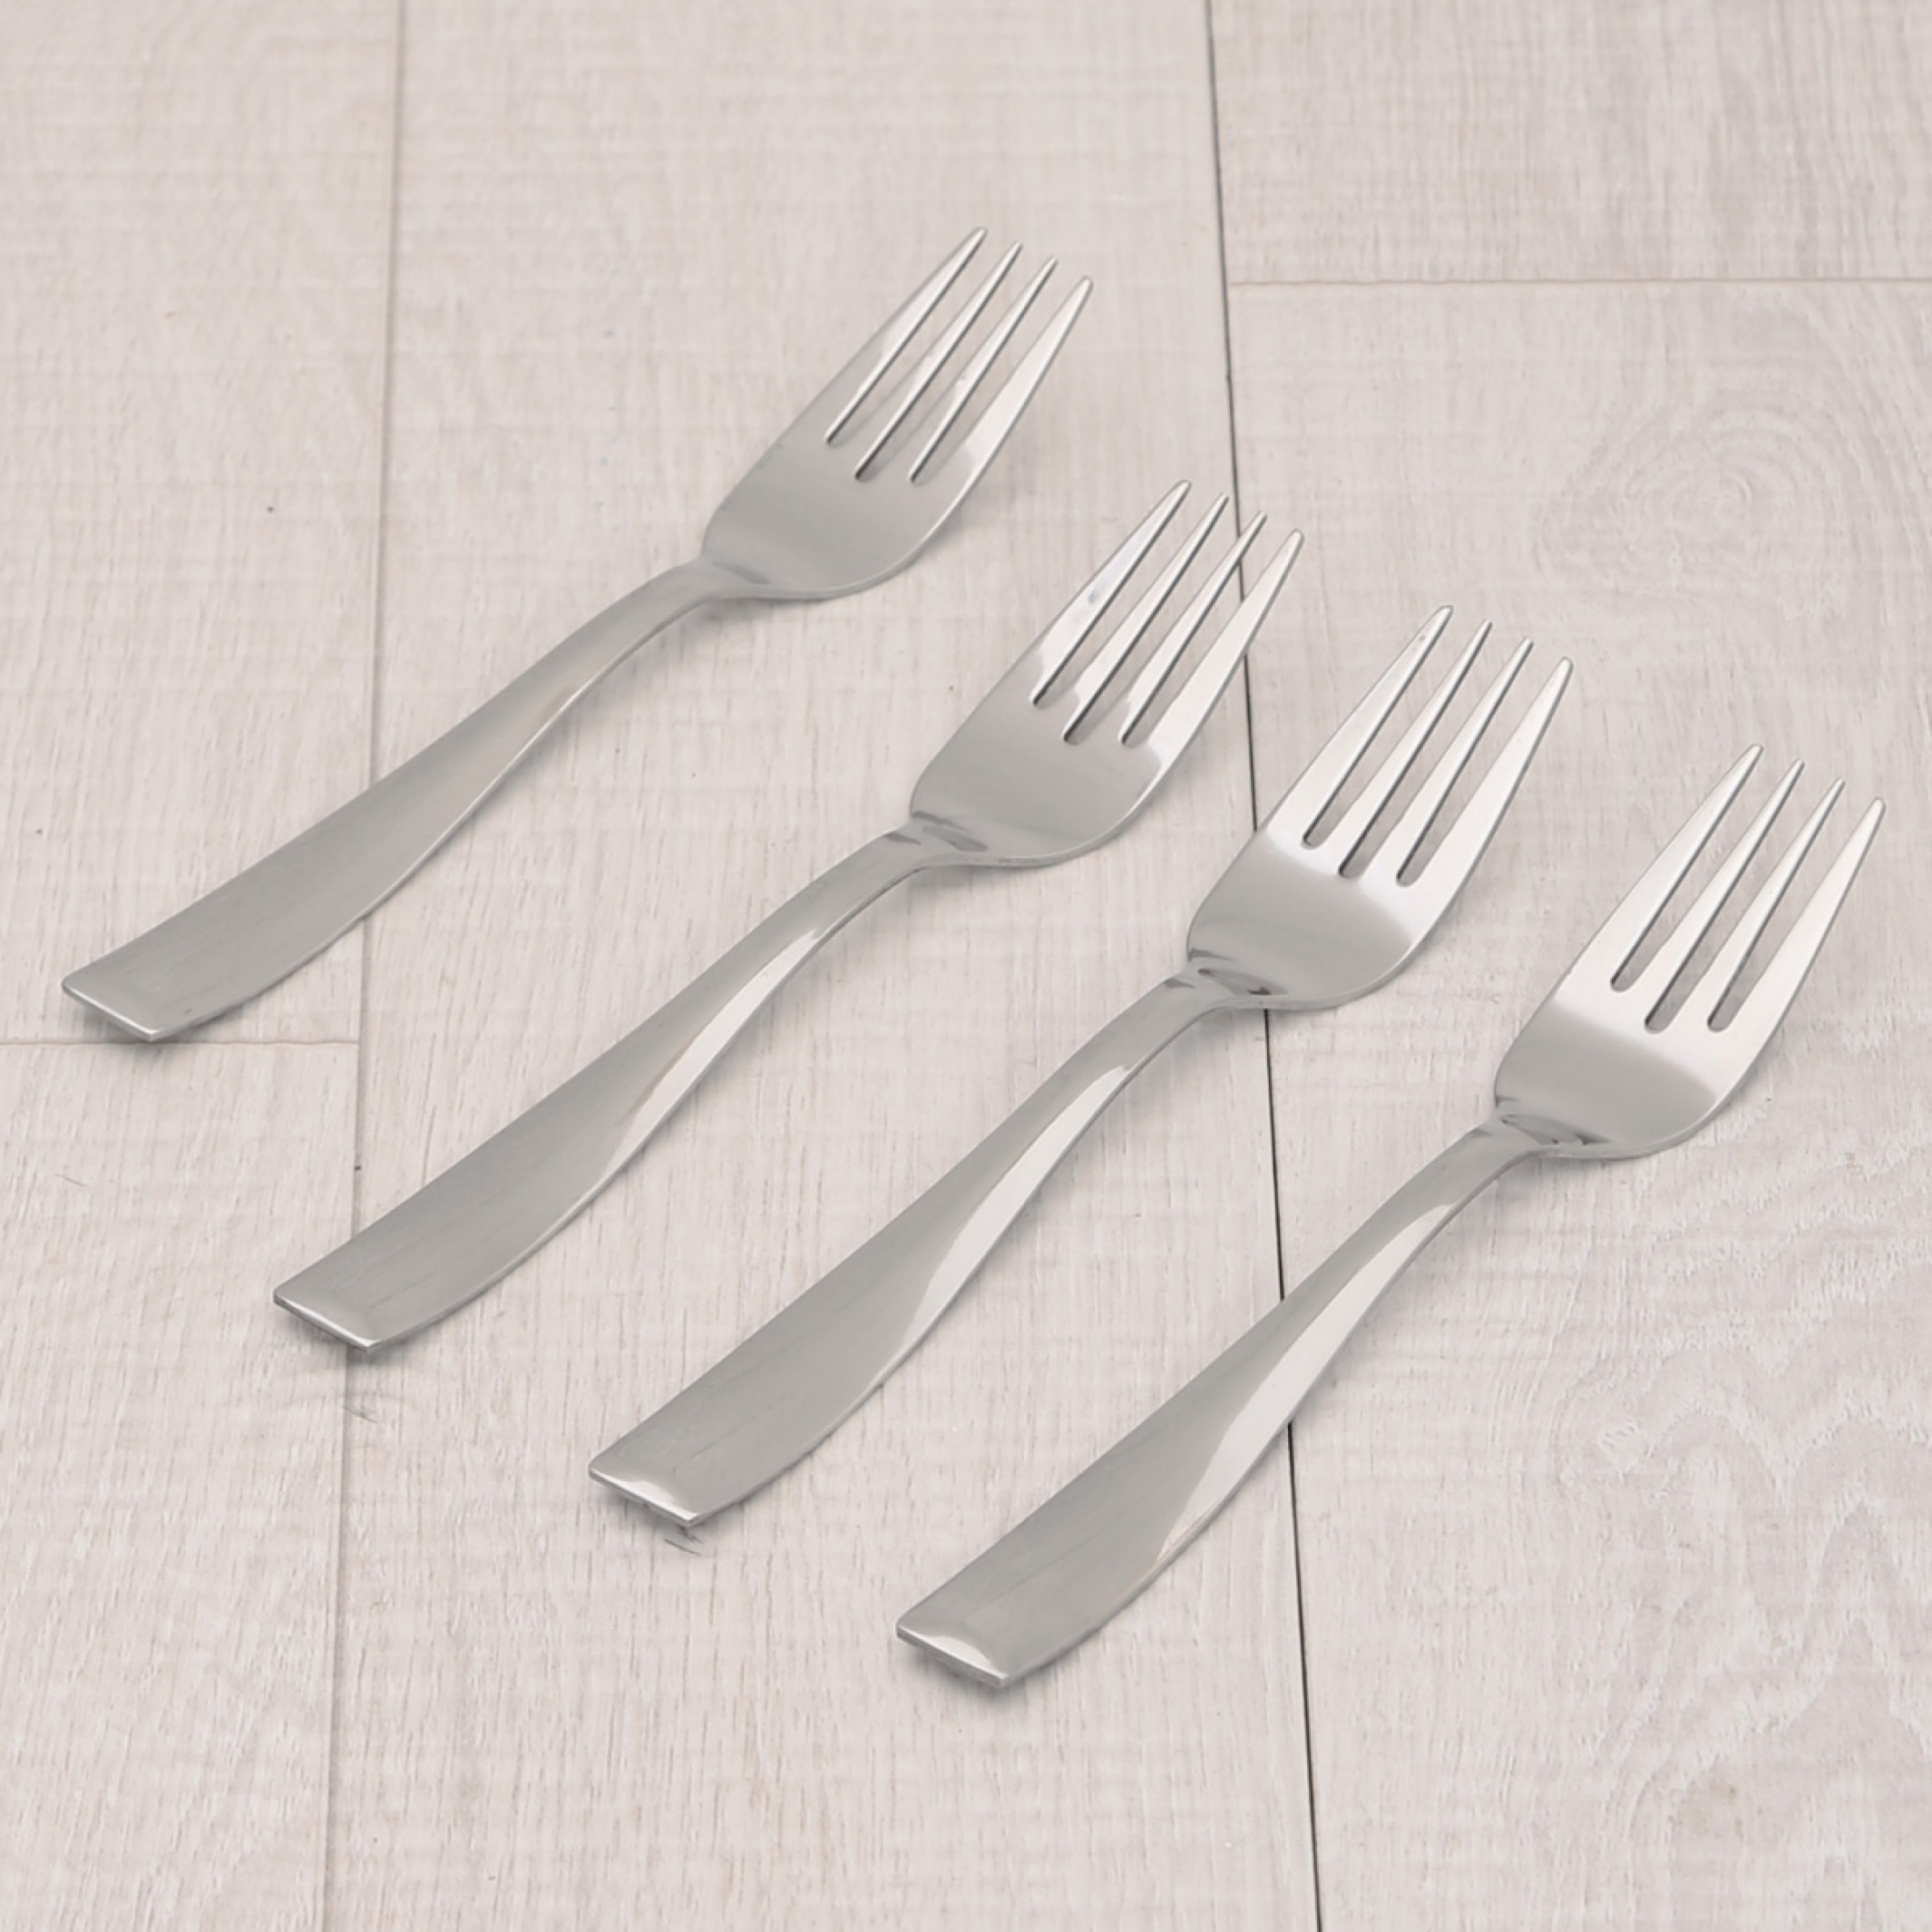 Glister Set of 6 Stainless Steel Baby Forks